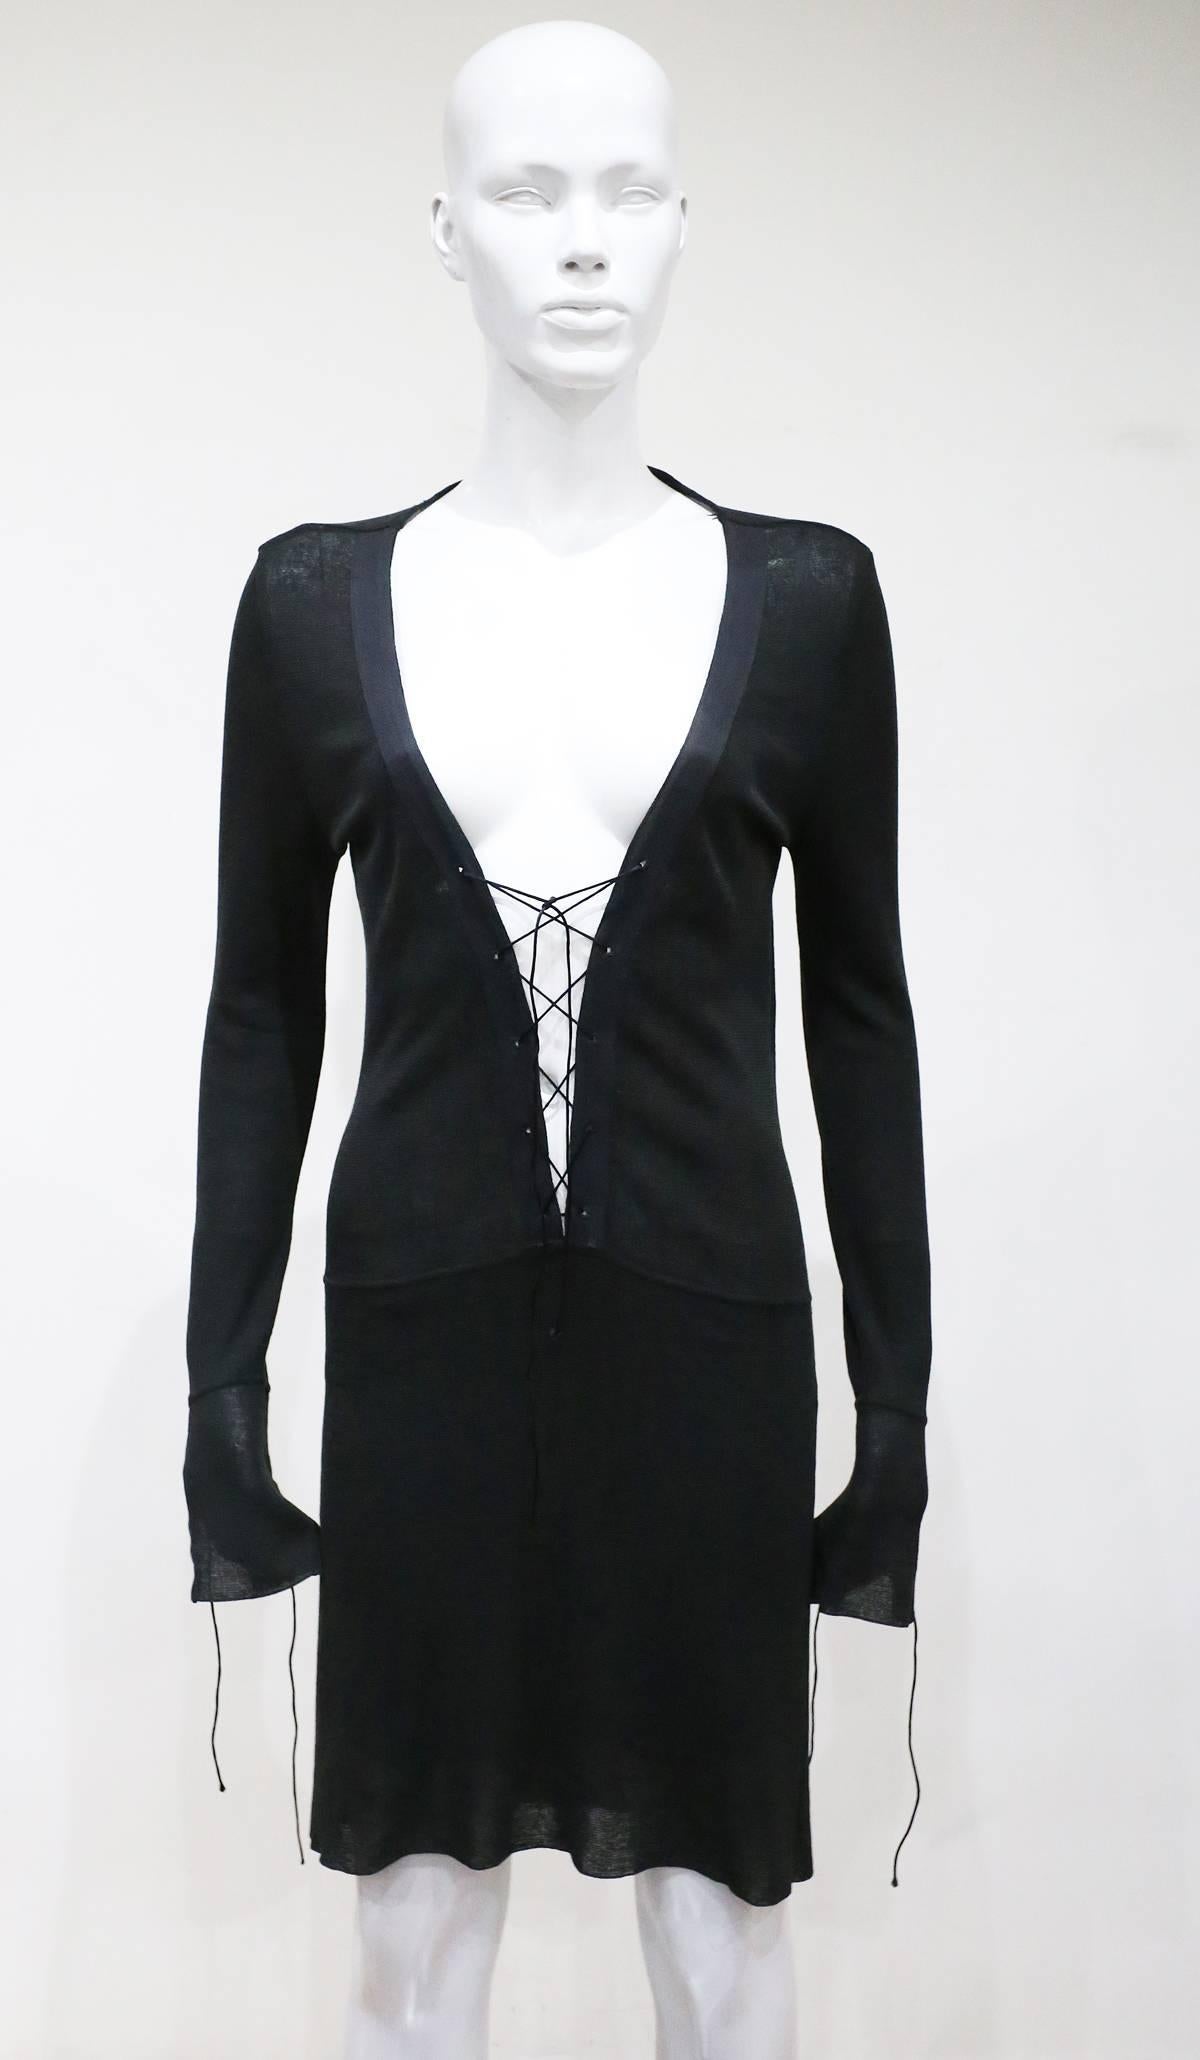 Tom Ford for Gucci knitted black dress with super low plunge and lace up fastenings on collar and cleavage. Circa 1990s. 

XS - S